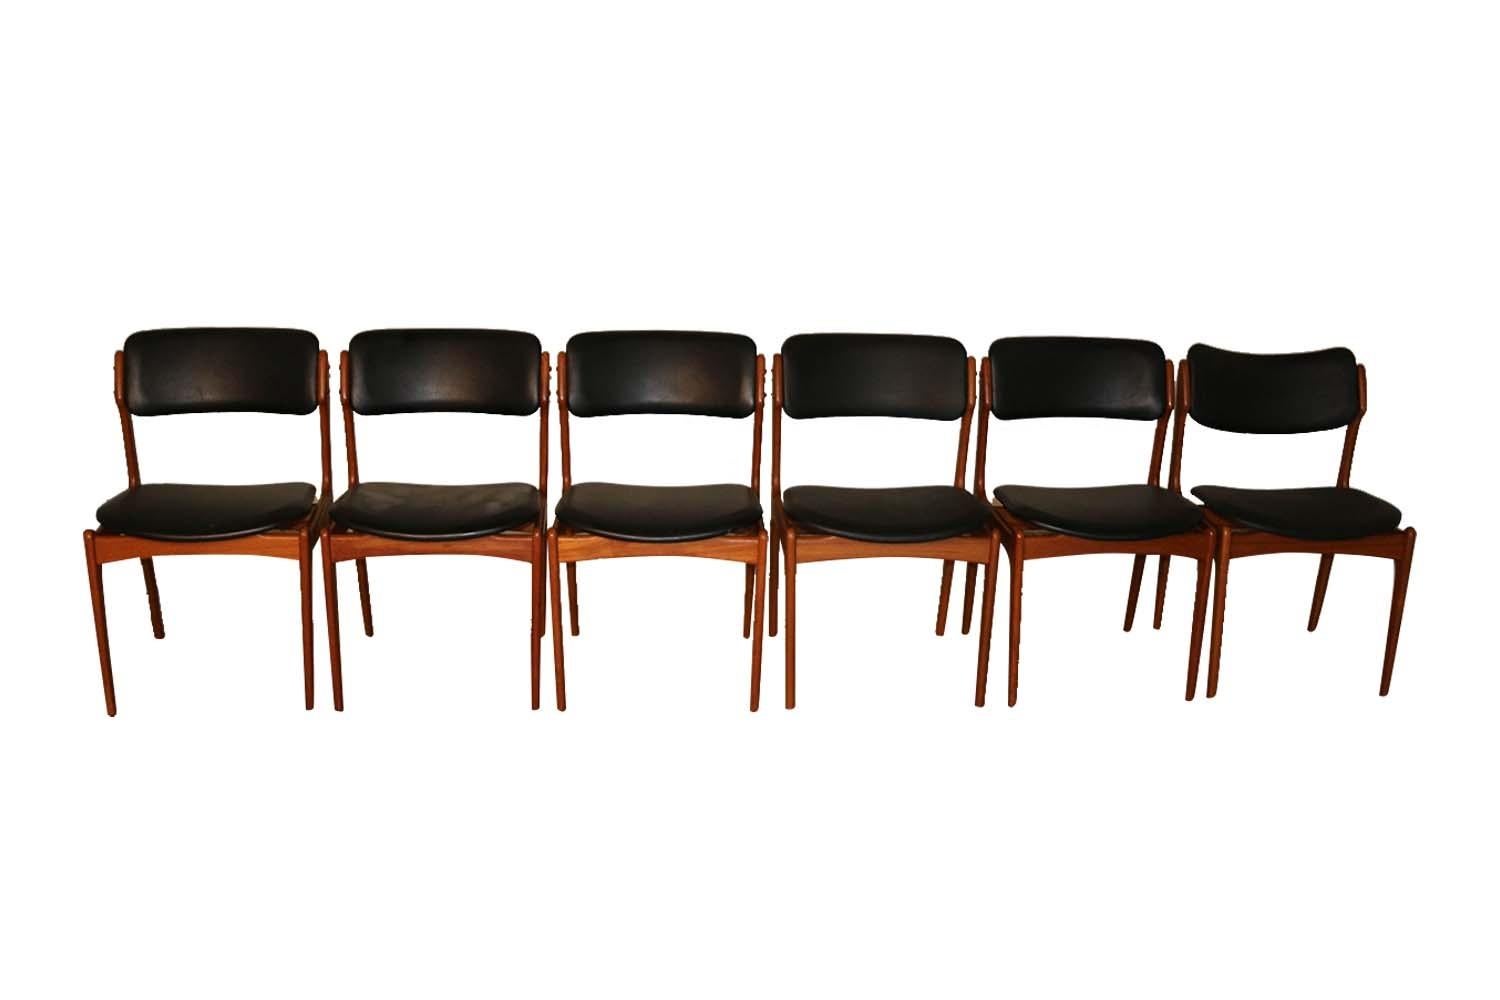 Six beautiful mid century model #49 teak dining chairs by Scandinavian designer Erik Buch for O.D. Mobler AS, circa 1960s. Buch’s organic and functional aesthetic are showcased in these beautifully crafted modern teak dining chairs. This rare set of